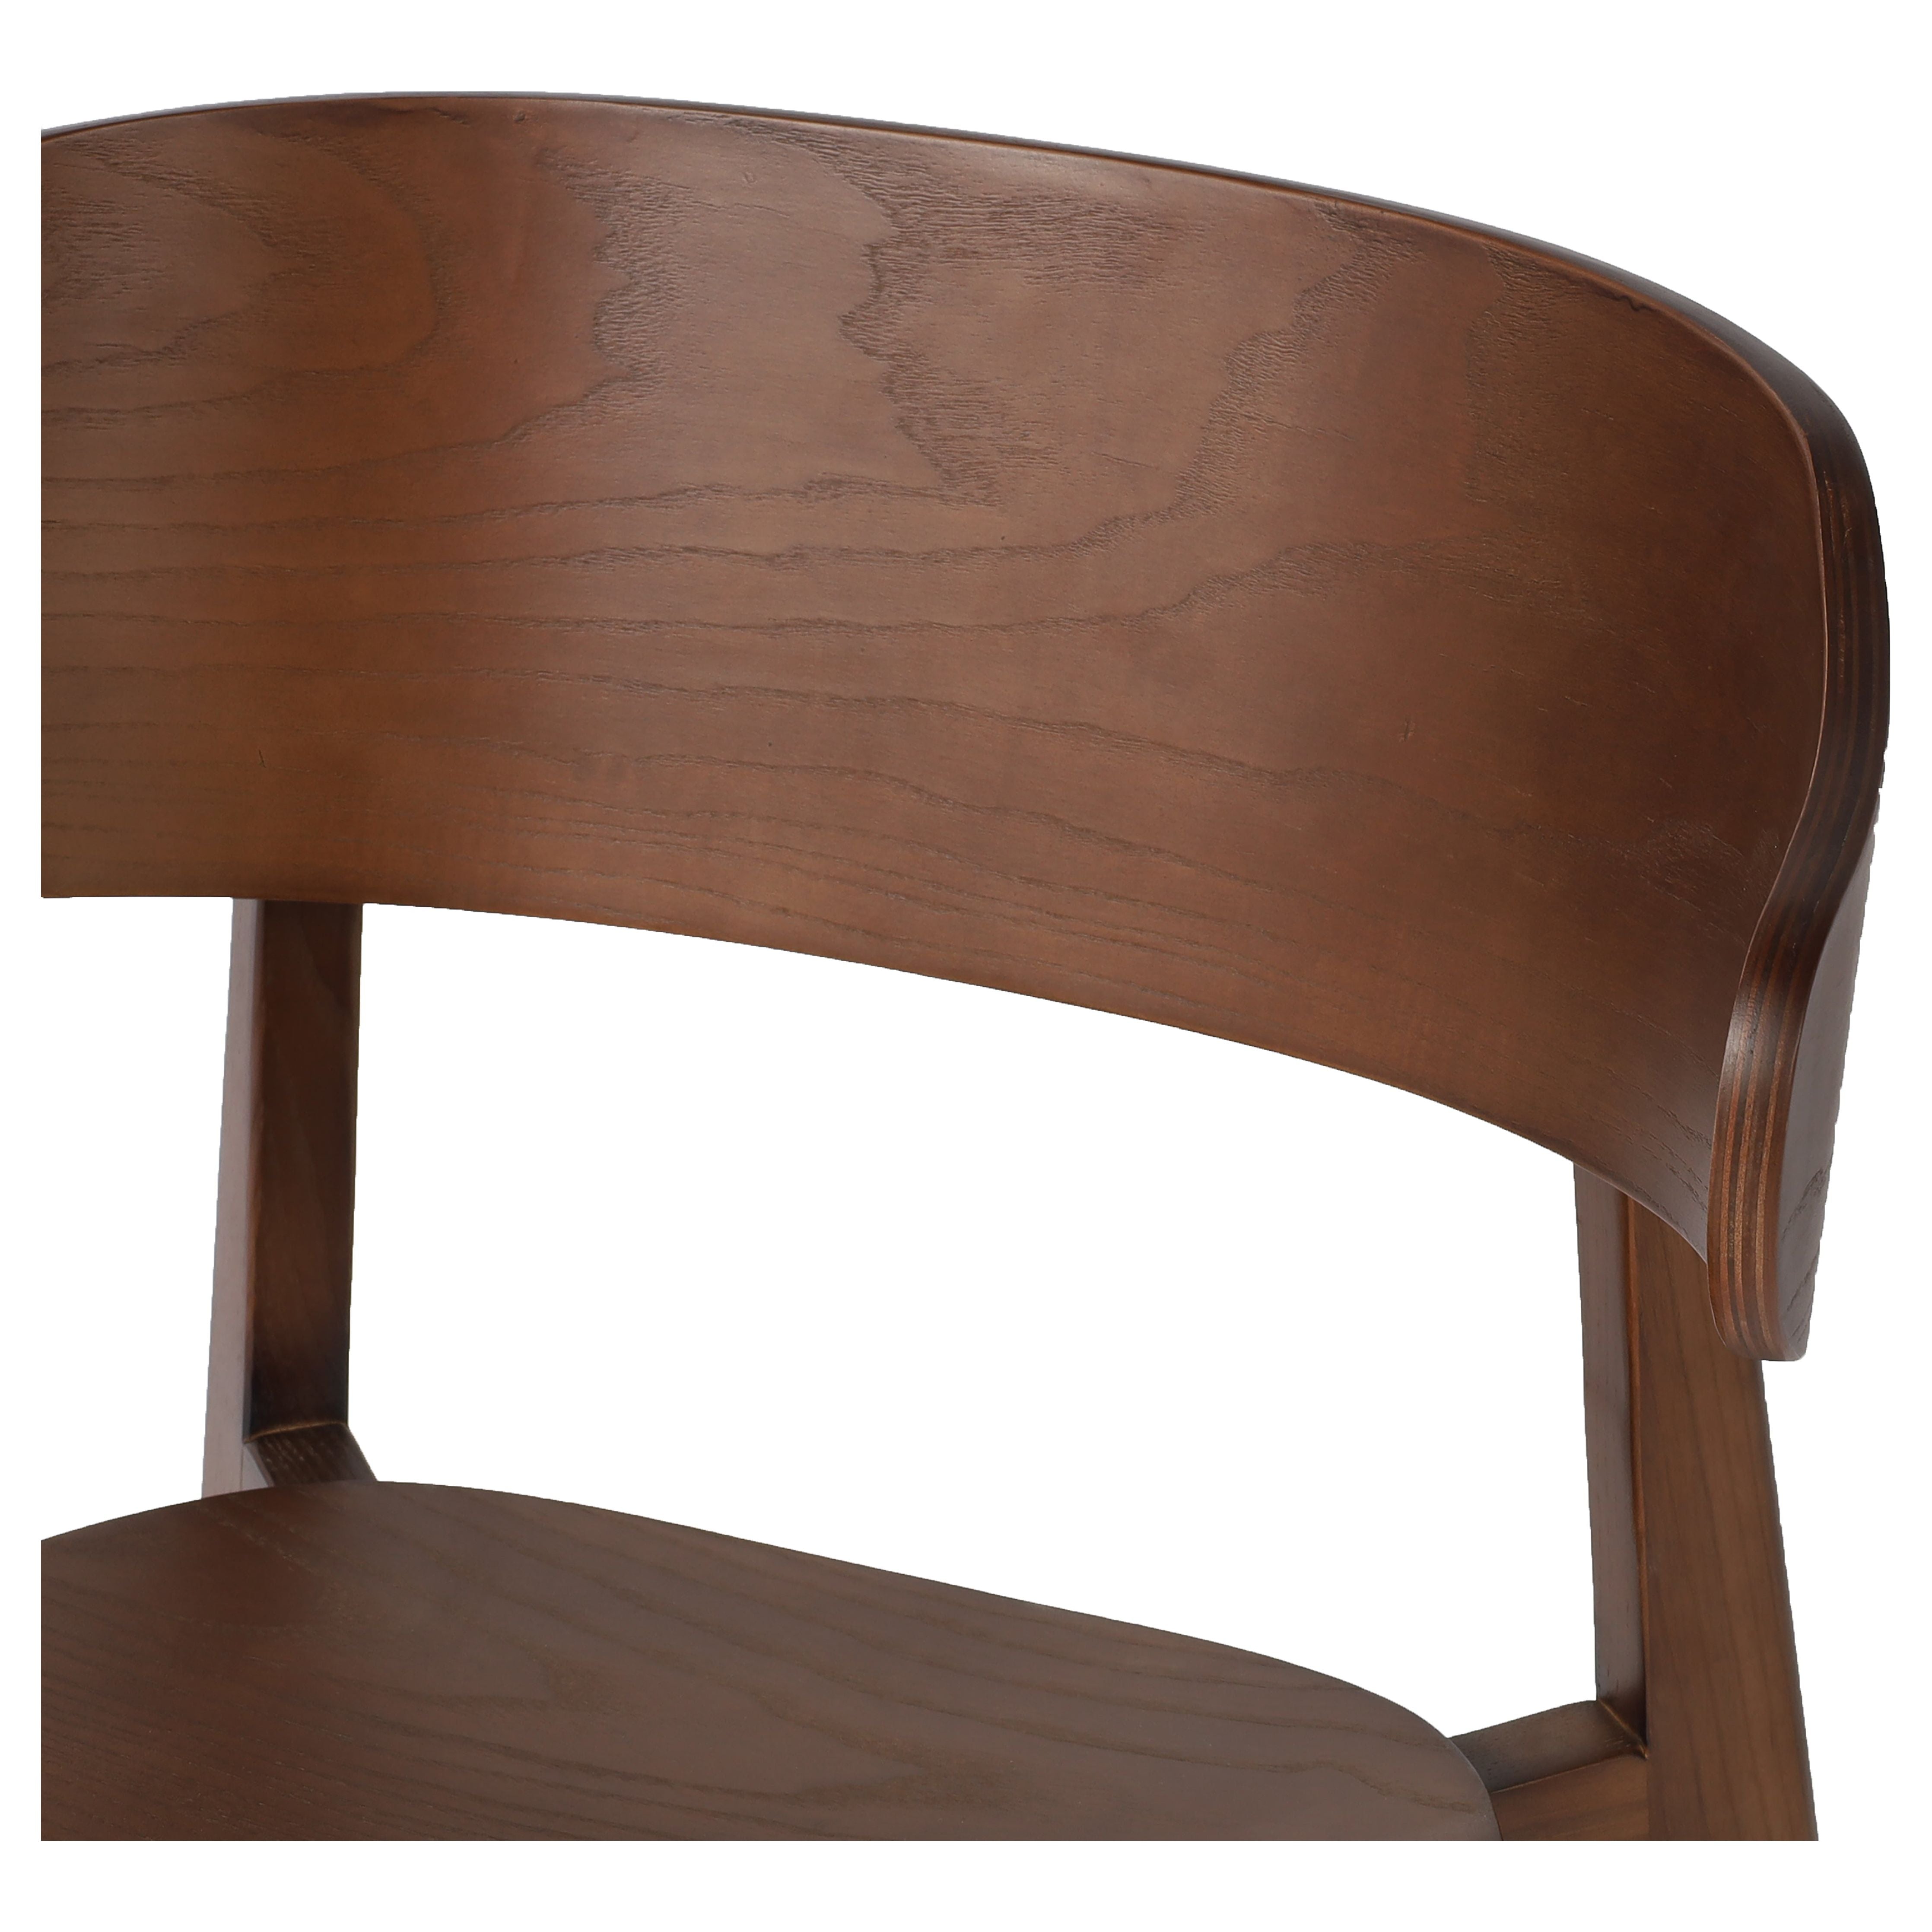 A fresh, exaggerated take on the wing-back dining chair. Finished in a natural hue, a mix of solid ash and ash veneer makes a modern and shapely seating statement with mid-century undertones. Amethyst Home provides interior design, new construction, custom furniture, and area rugs in the Los Angeles metro area.